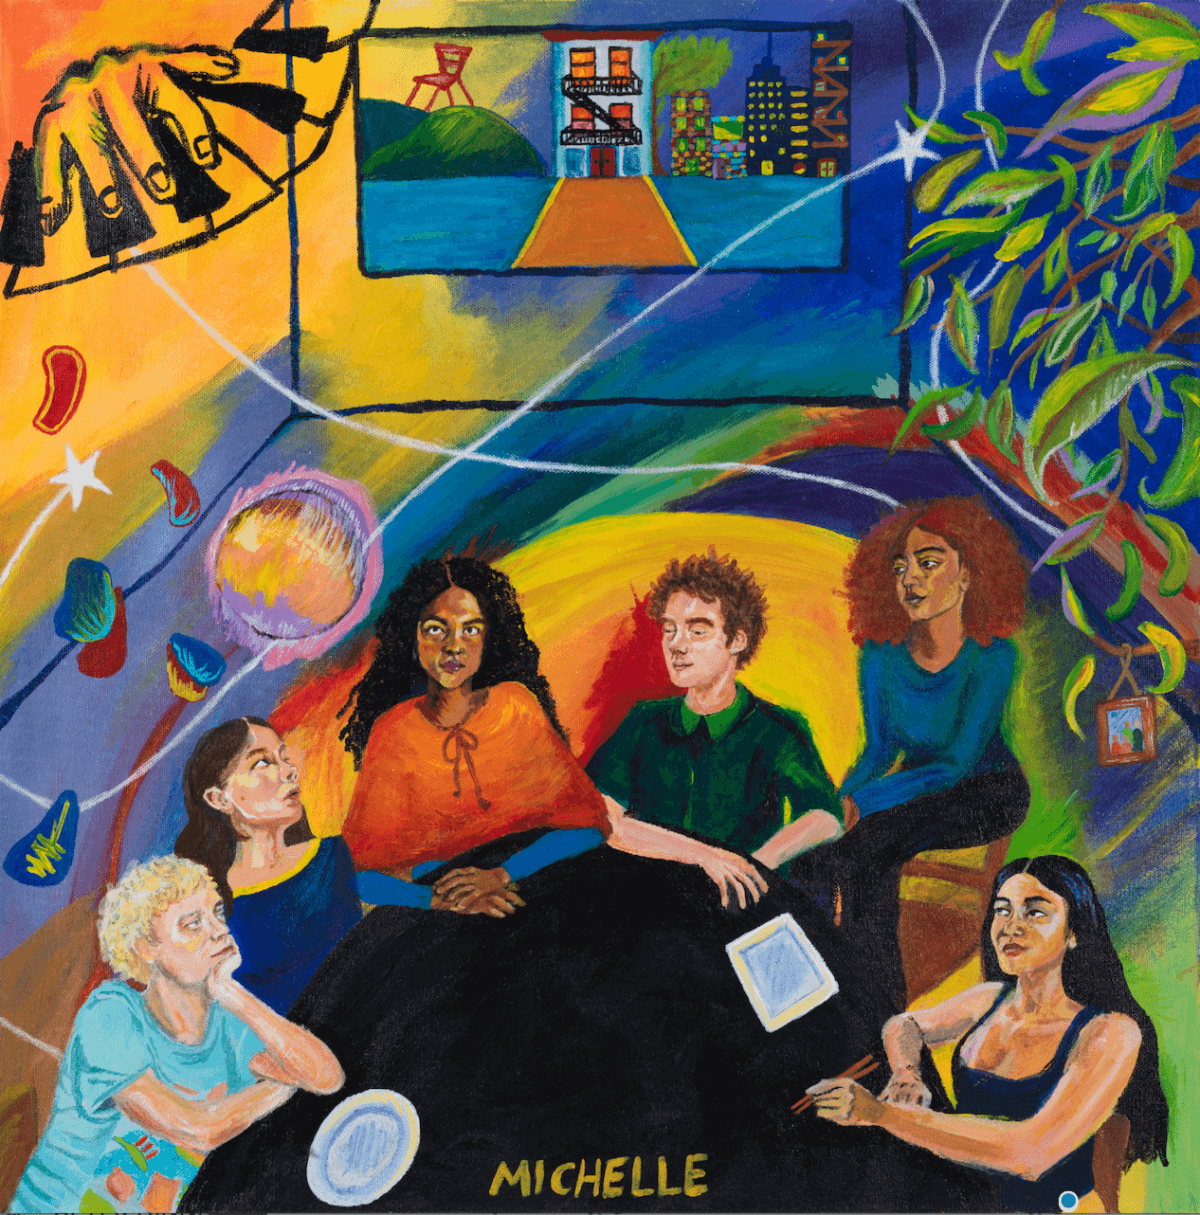 MICHELLE has shared a new song and video, for their new single "Mess U Made." The track, featuring harmonies from Michelle's four vocalists